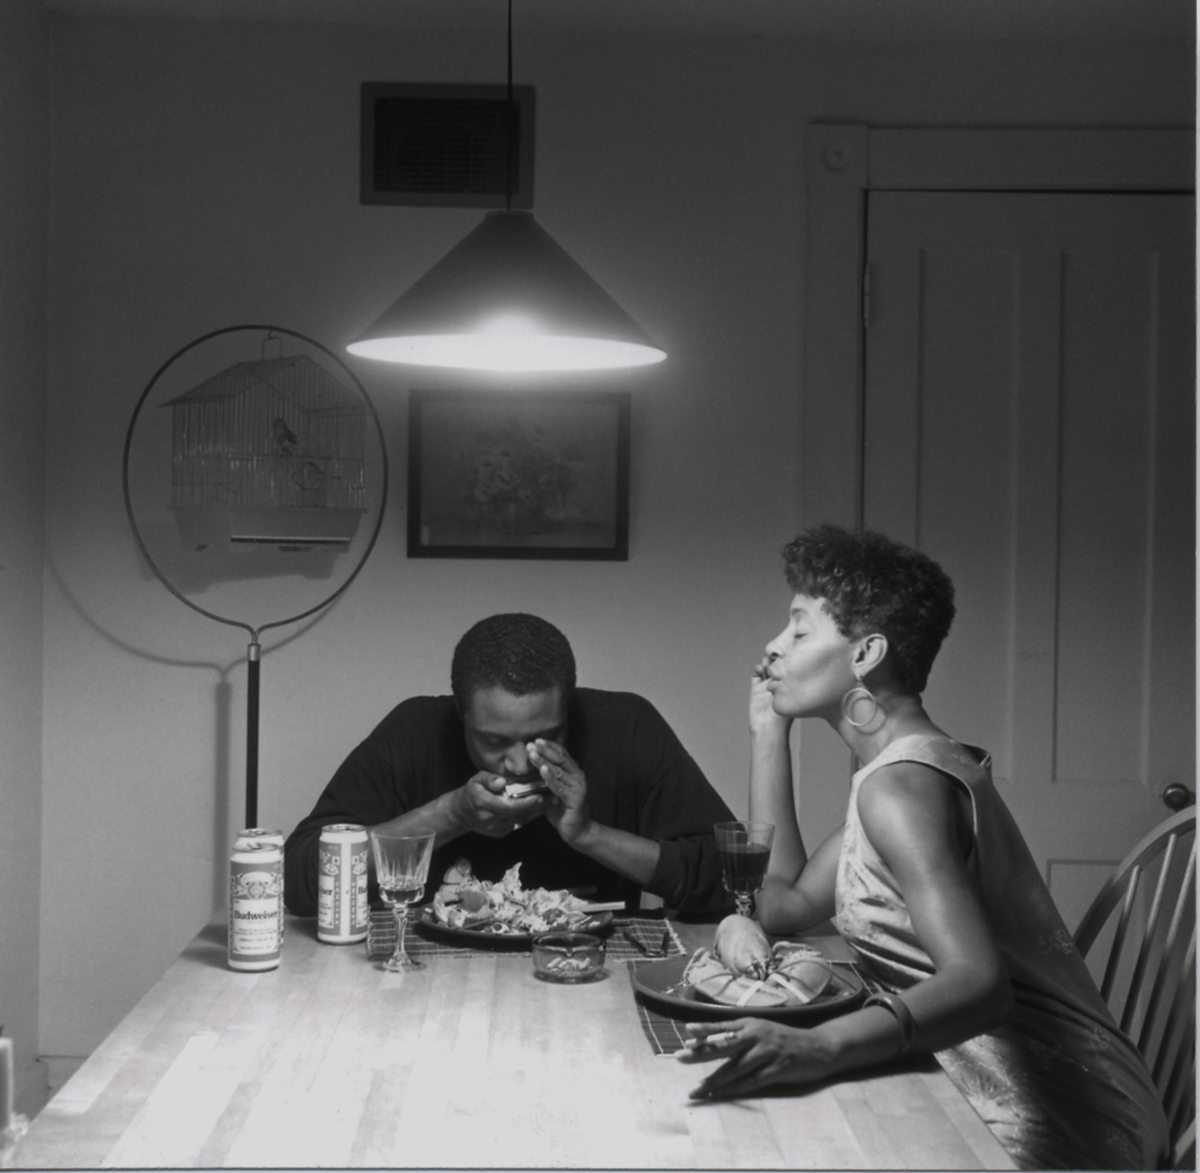 Carrie Mae Weems, “Untitled (Playing harmonica)” (1990-1999) © Carrie Mae Weems. Courtesy of the artist and Jack Shainman Gallery, New York.